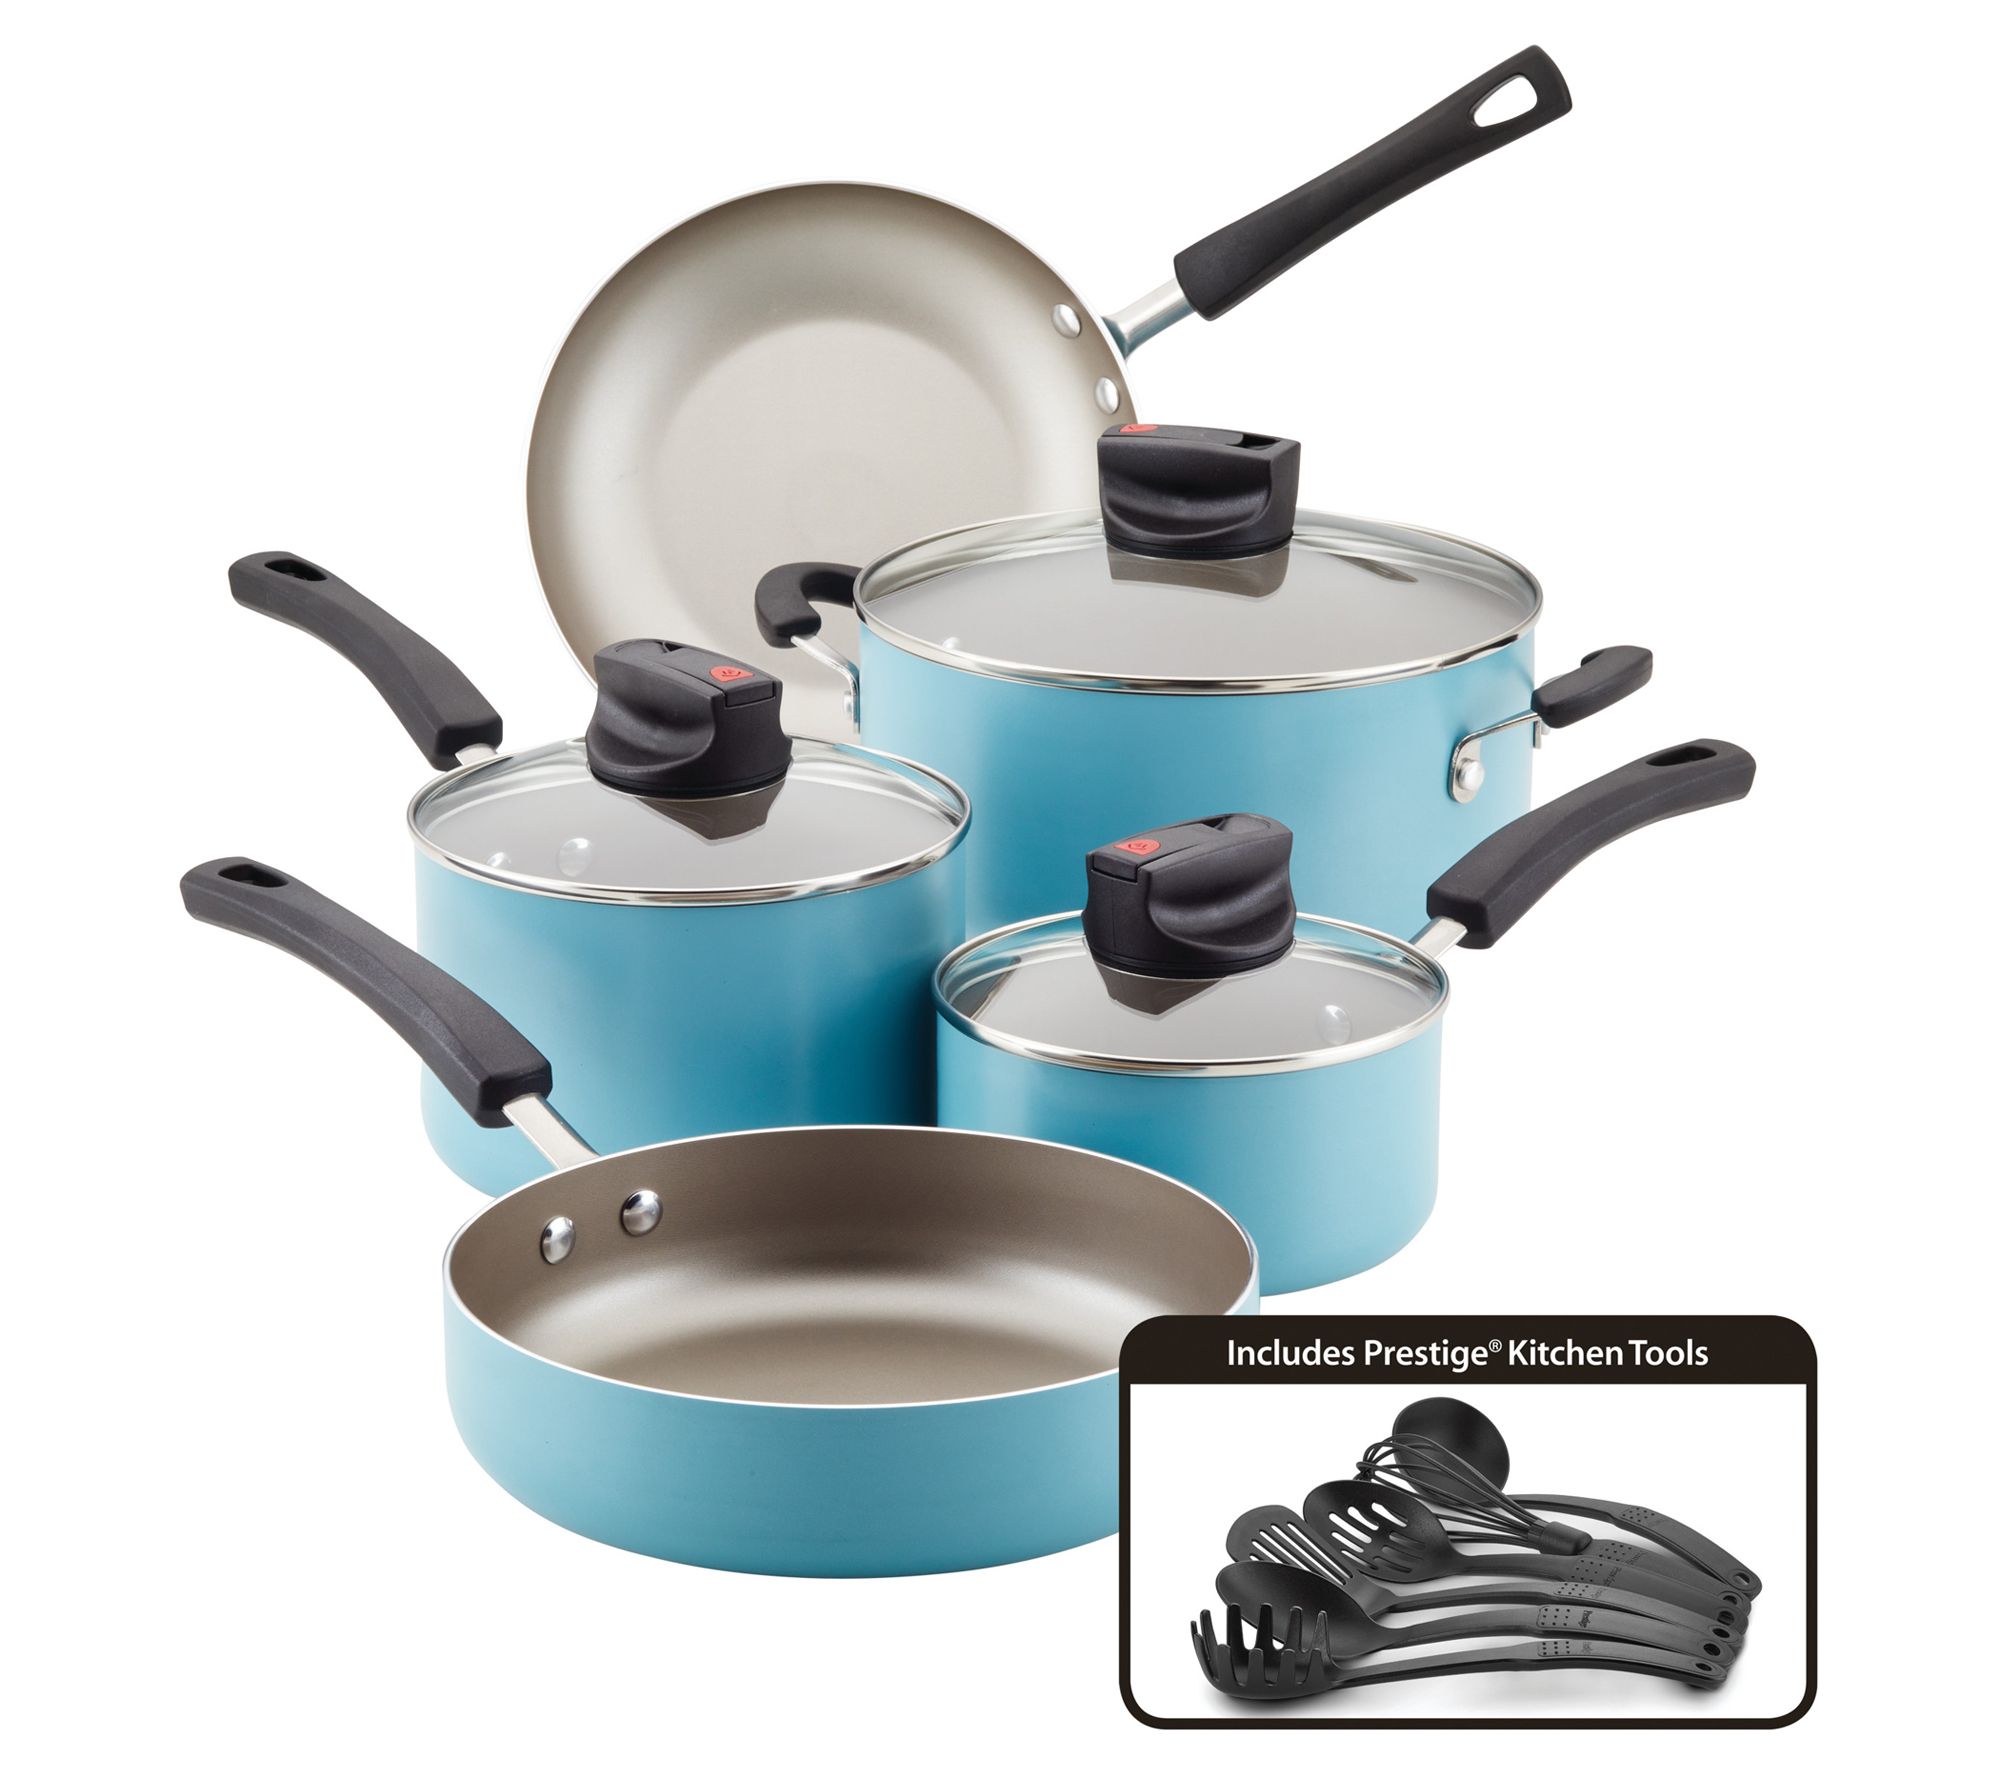 T-fal Simply Cook Ceramic Cookware, 12pc Set, Blue 12 ct